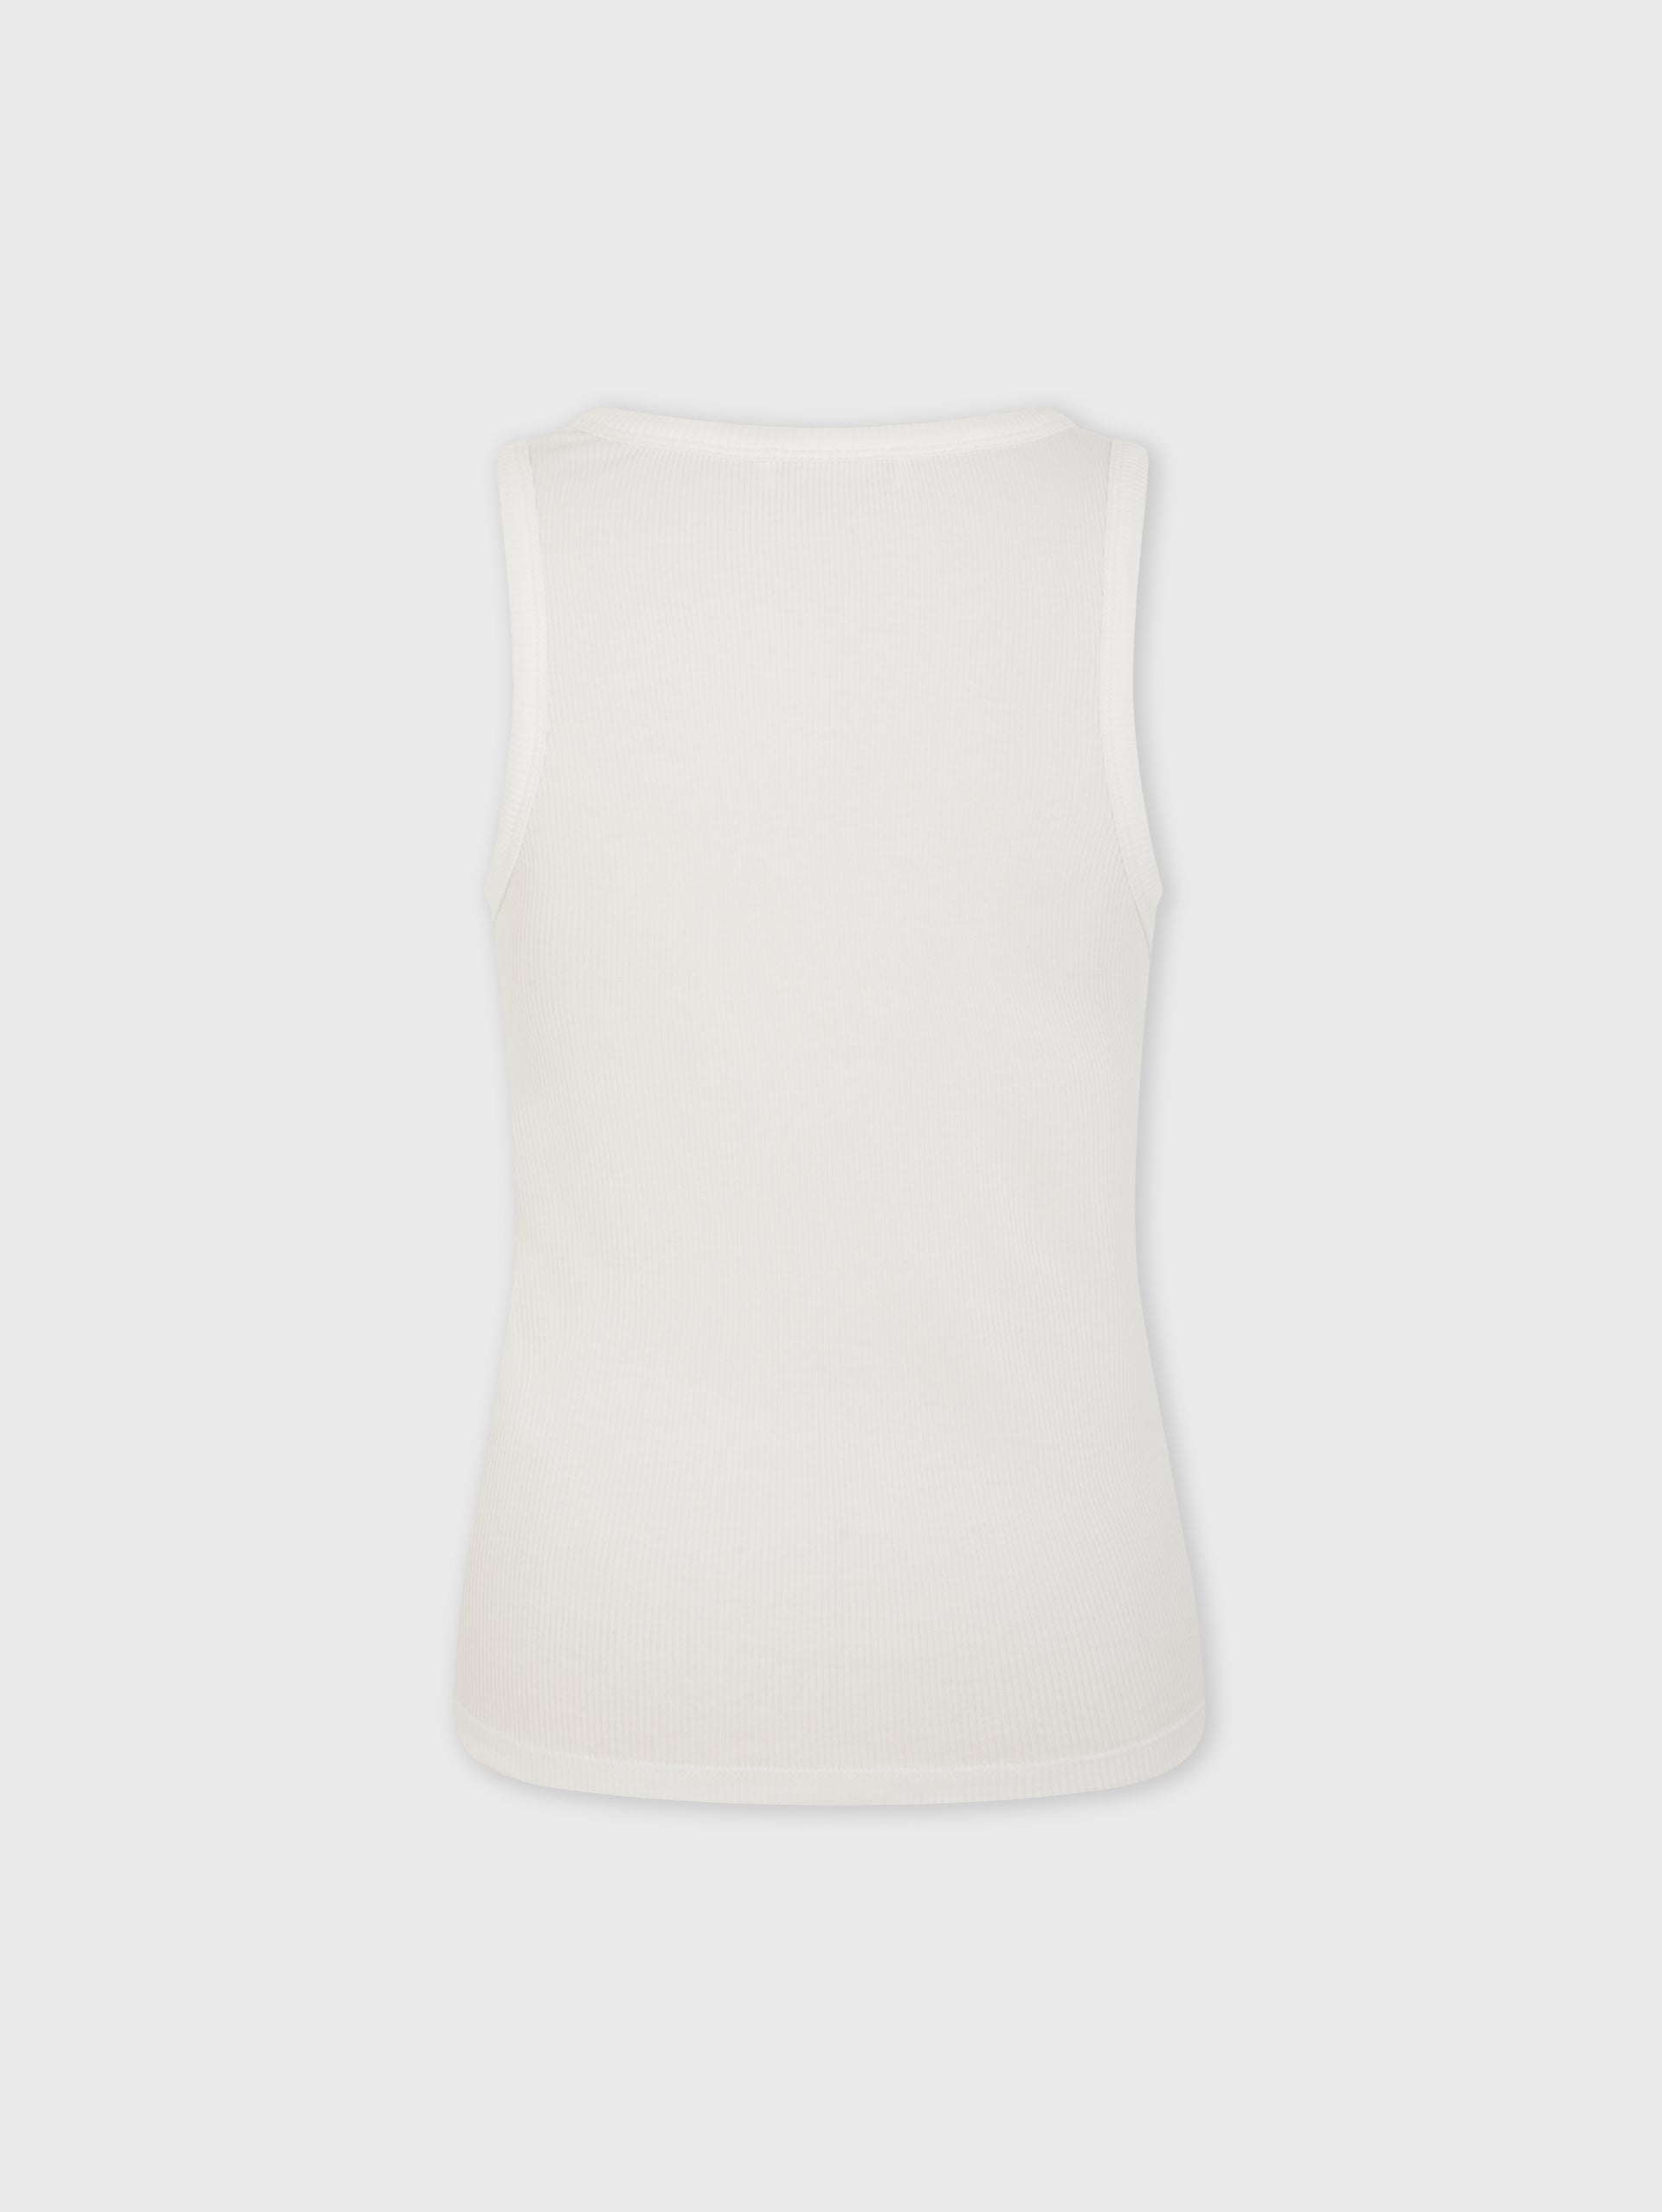 White Tank Top with signature piercing